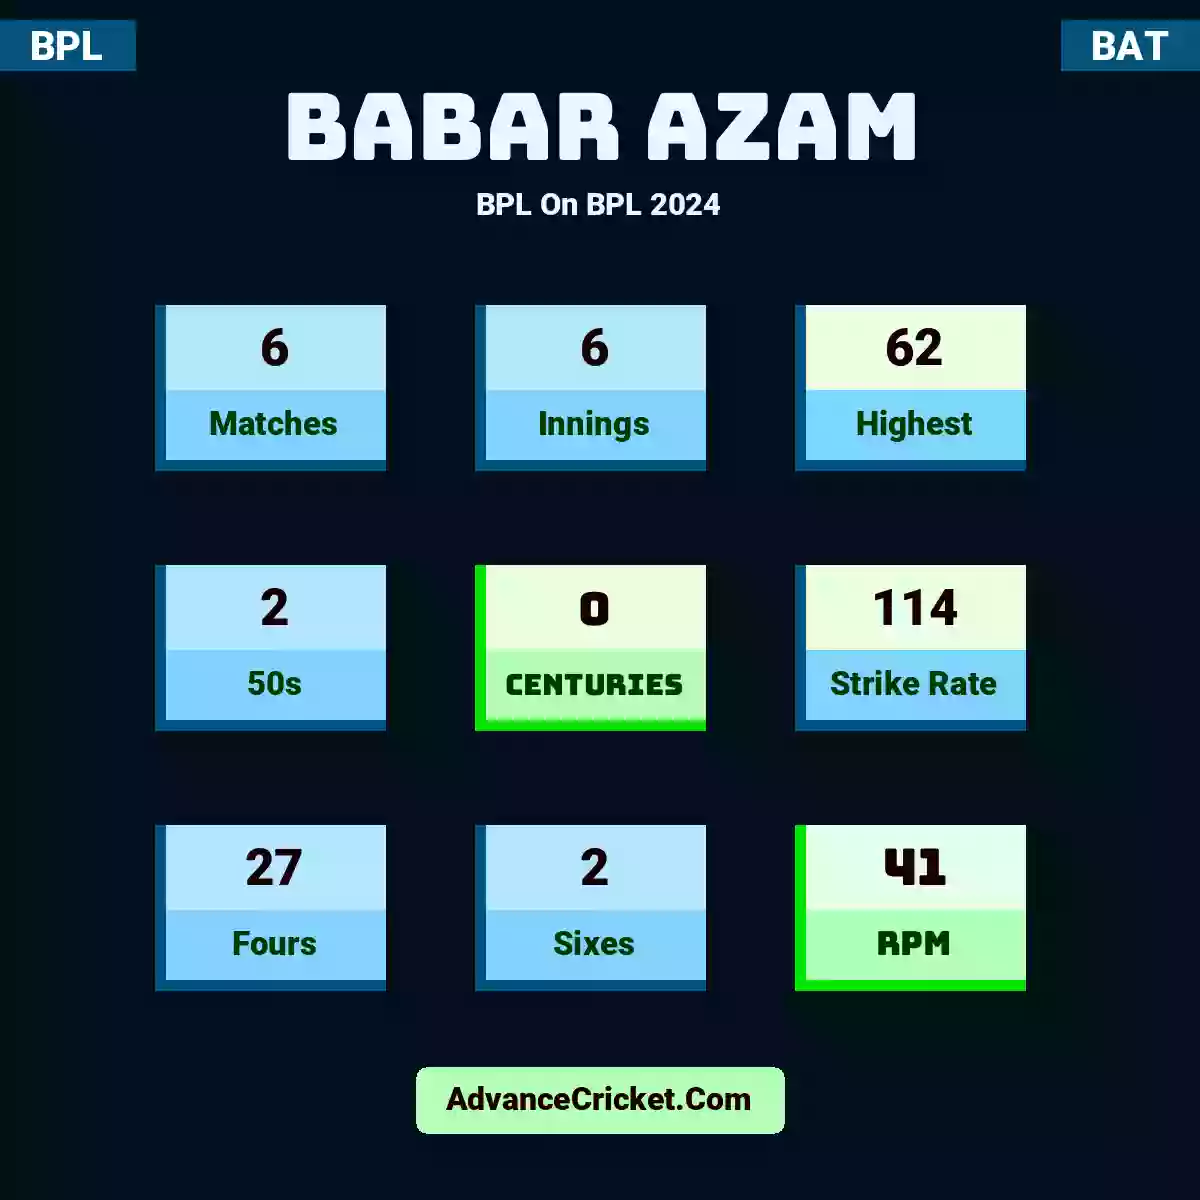 Babar Azam BPL  On BPL 2024, Babar Azam played 6 matches, scored 62 runs as highest, 2 half-centuries, and 0 centuries, with a strike rate of 114. B.Azam hit 27 fours and 2 sixes, with an RPM of 41.